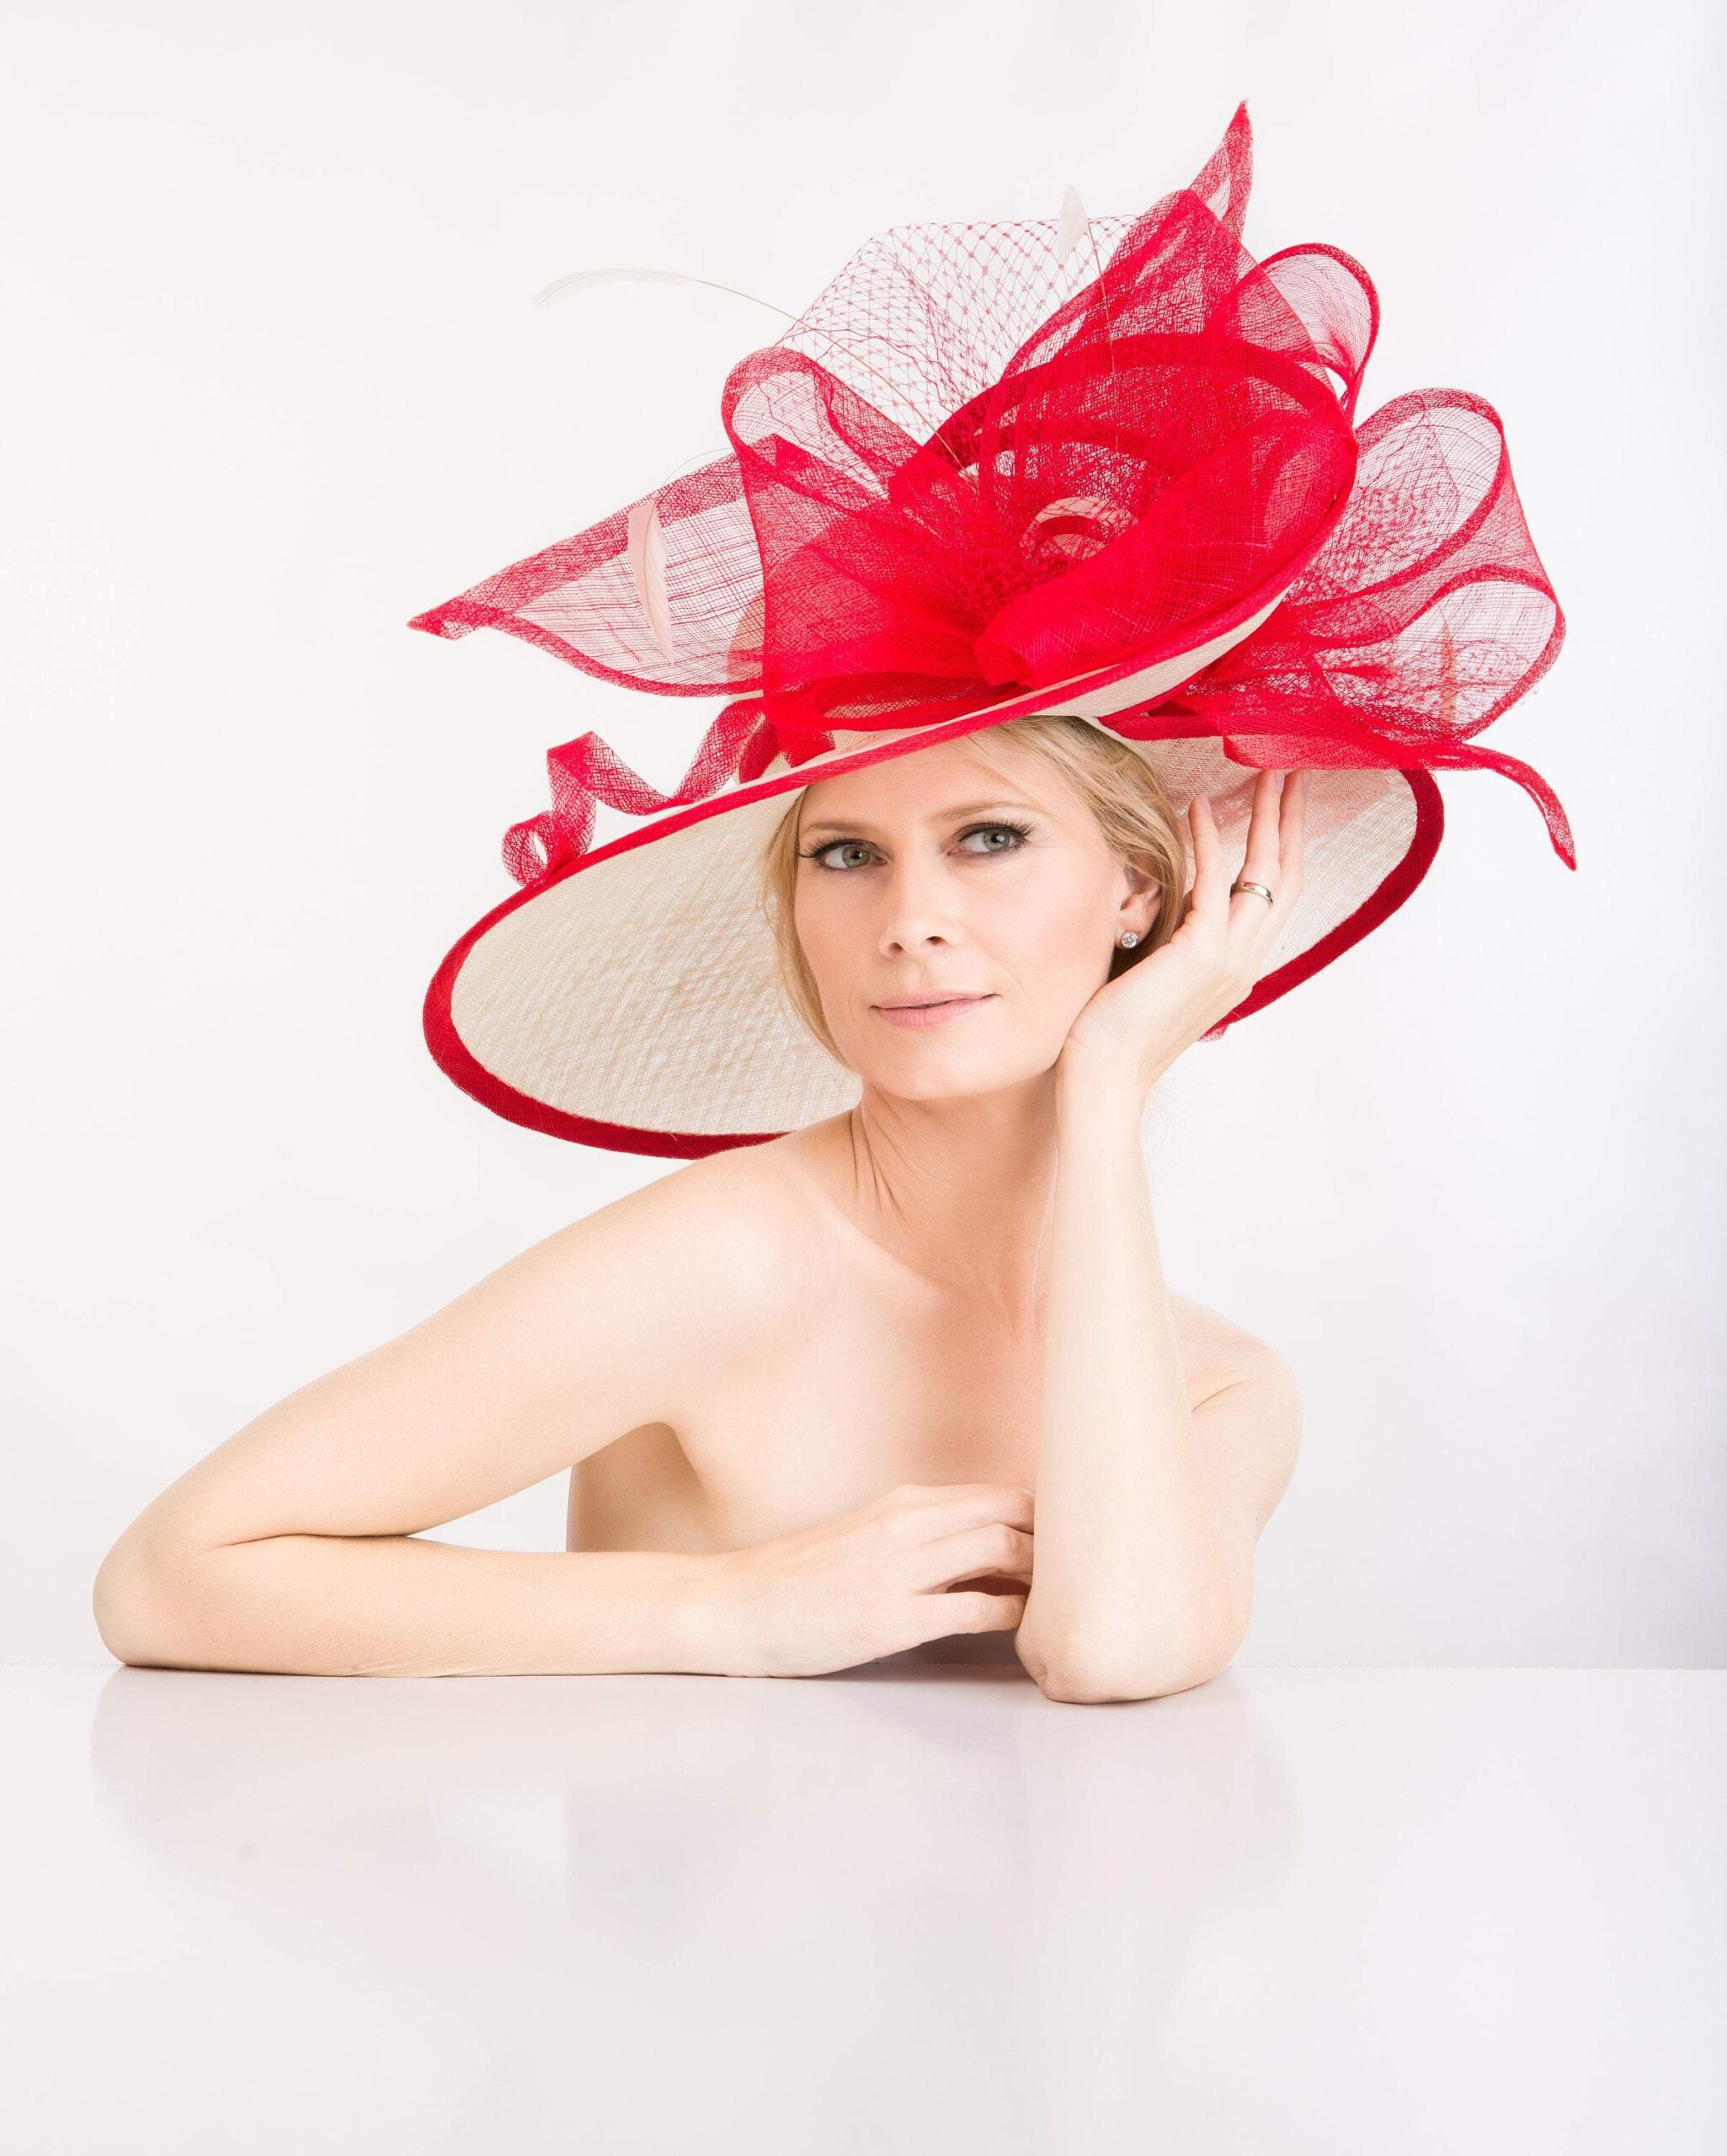 2018 collection. Kentucky Derby red hat, ivory hat, , Red Derby hat, women hat, Royal Ascot hat, couture fashion hat, formal hat, wedding, r